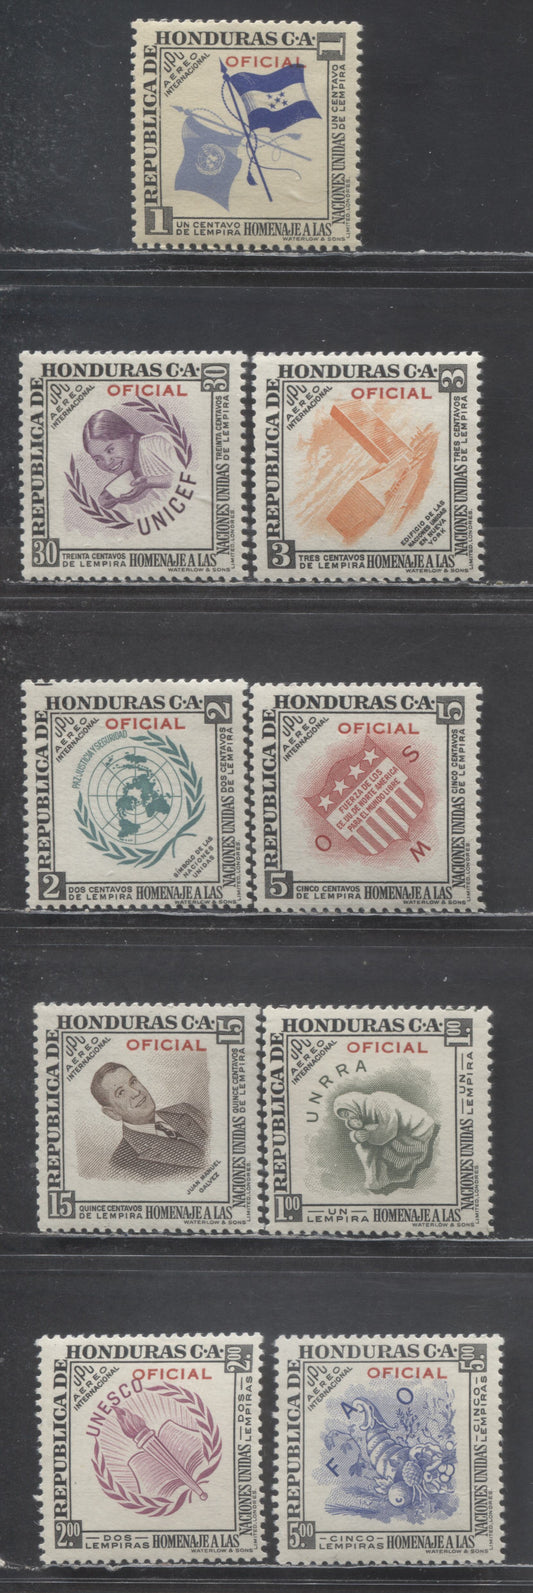 Lot 87 Honduras SC#CO60-CO68 1953 United Nations Airmail Officials, 9 VFNH Singles, Click on Listing to See ALL Pictures, 2022 Scott Cat. $22.2